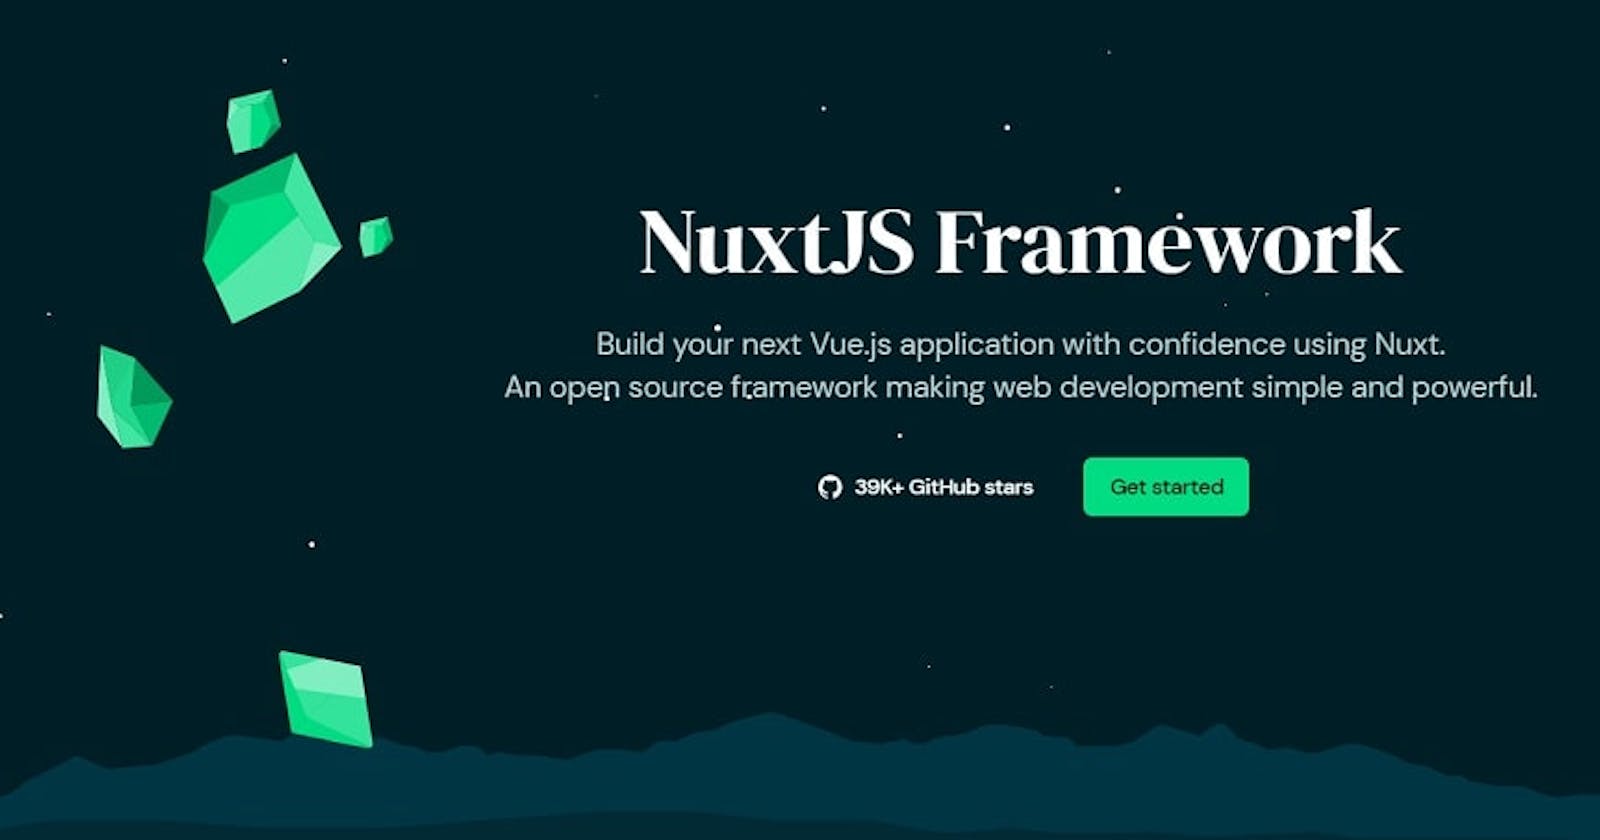 NuxtJS Templates - A Curated List